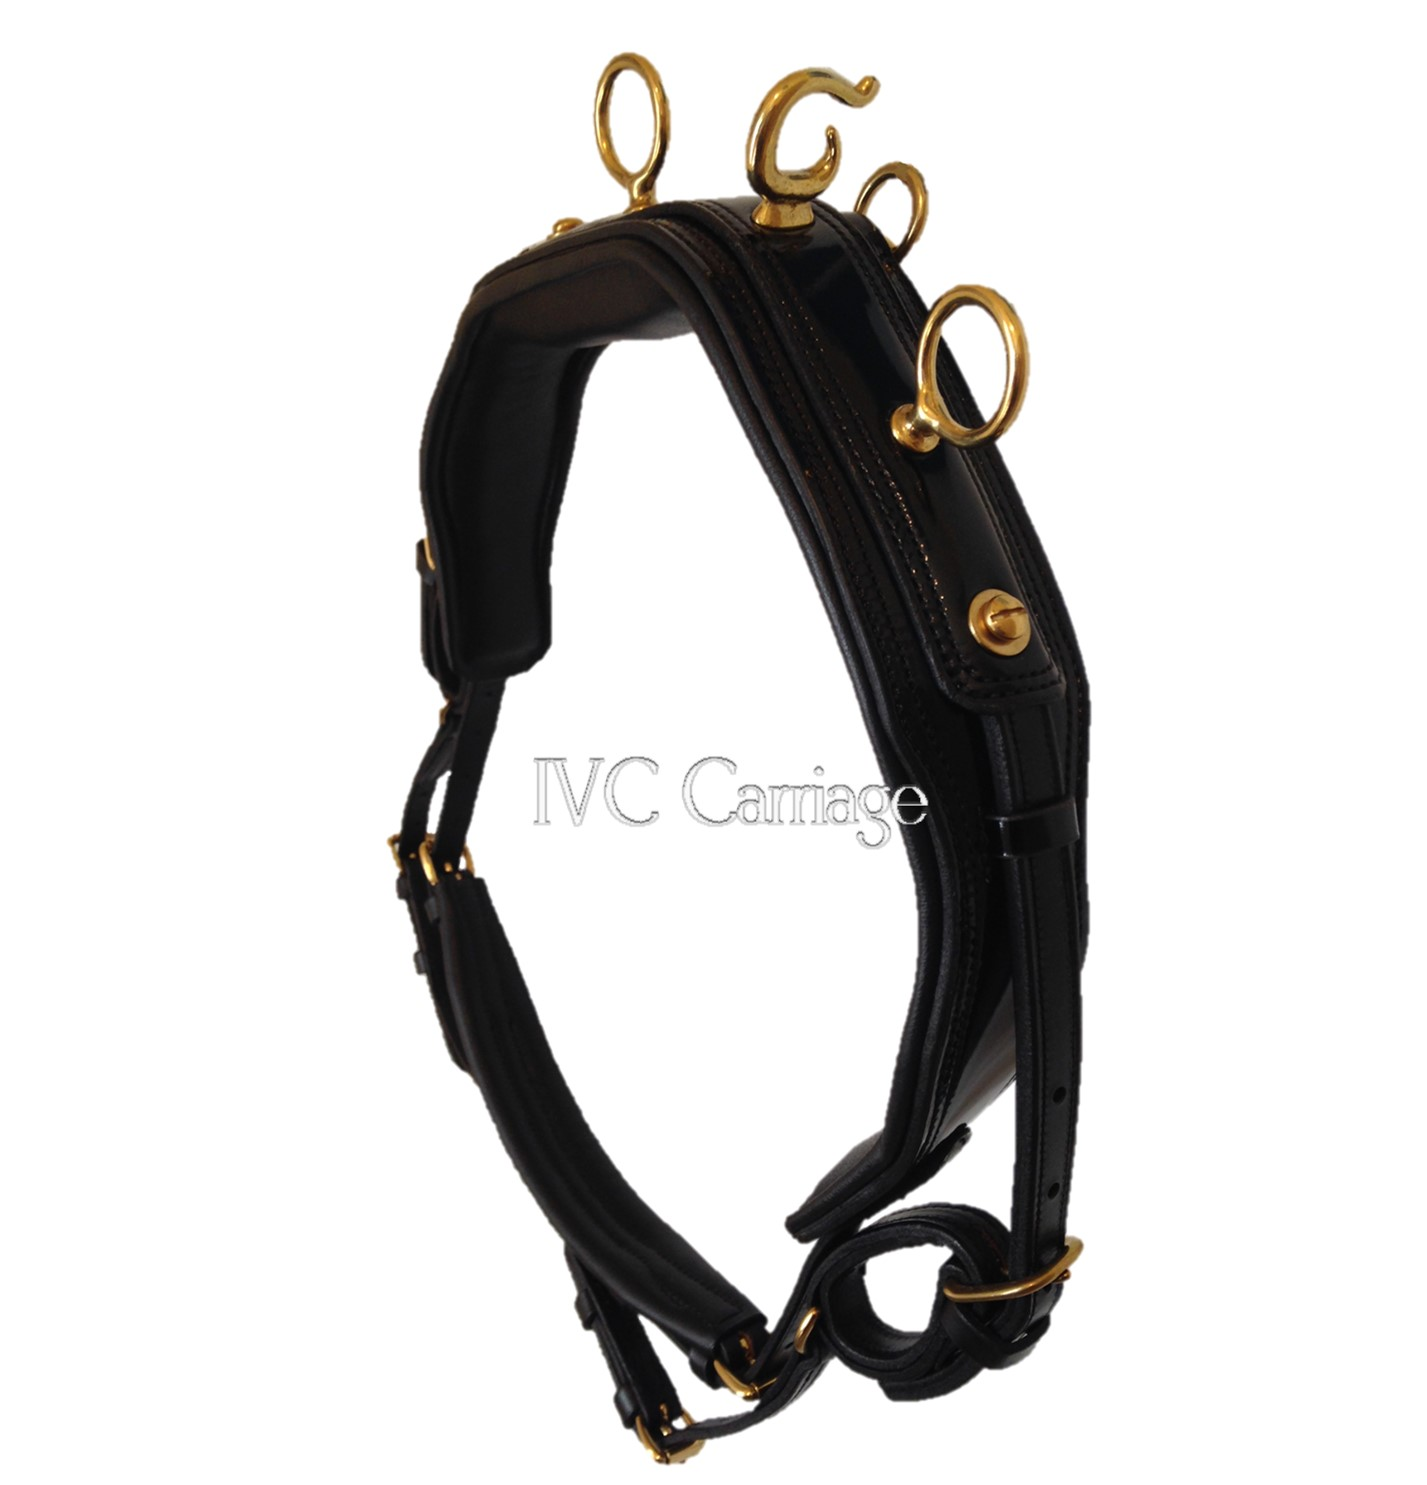 IVC Horse Harness Saddle | IVC Carriage